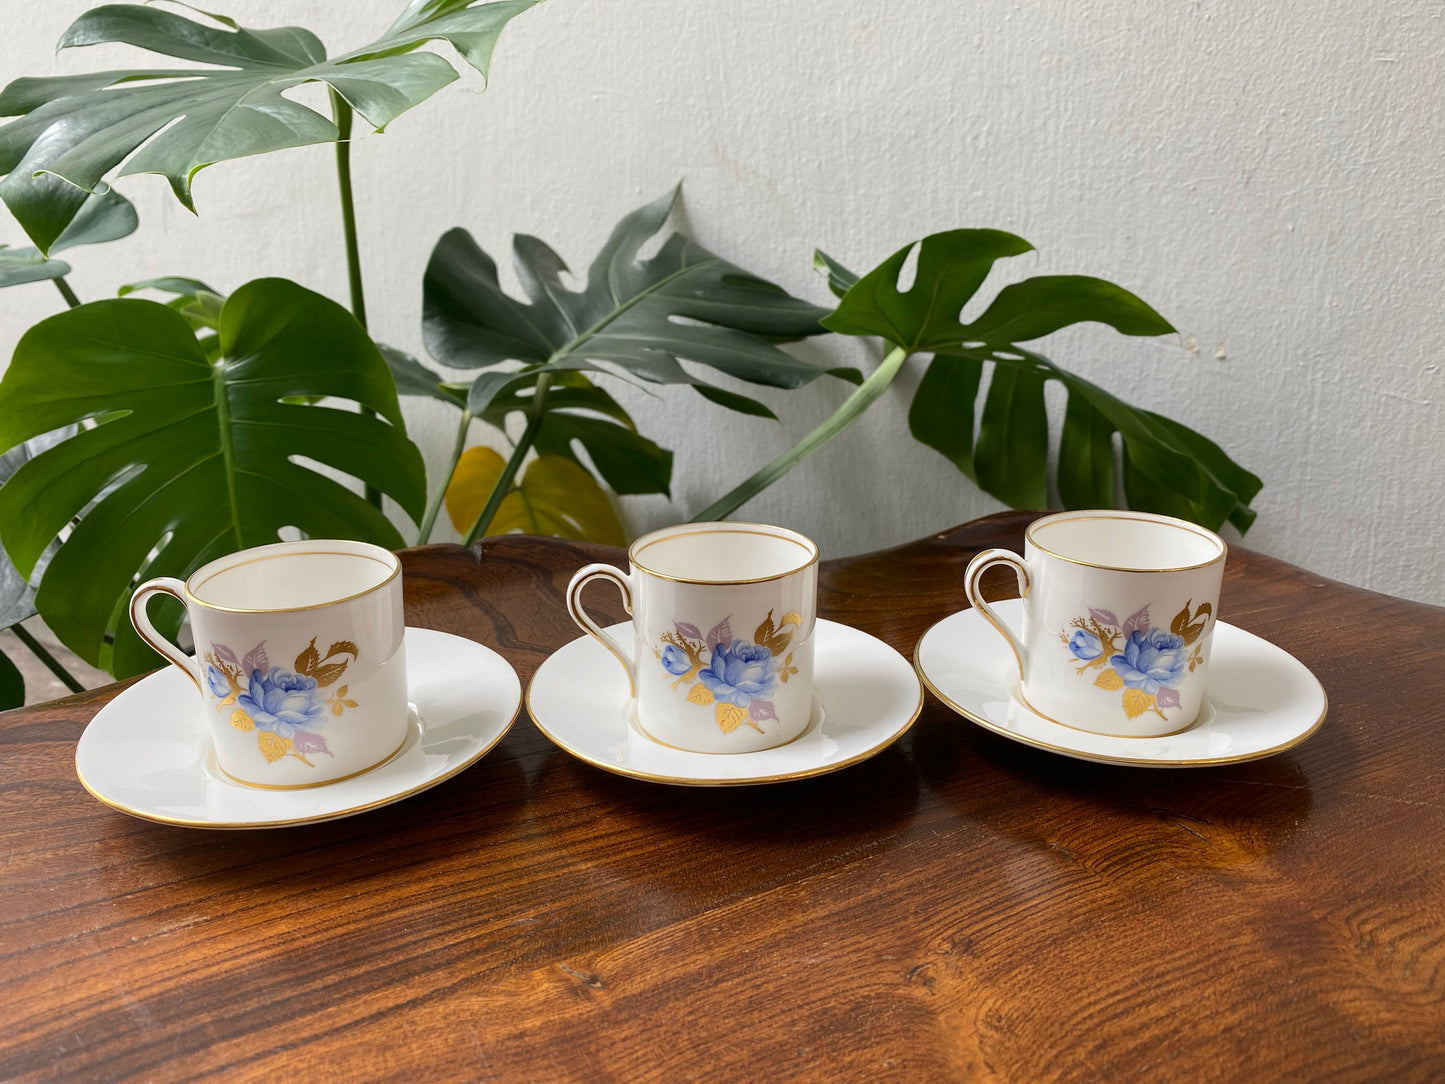 Vintage Aynsley Blue English Rose Demitasse Coffee Cups and Saucers